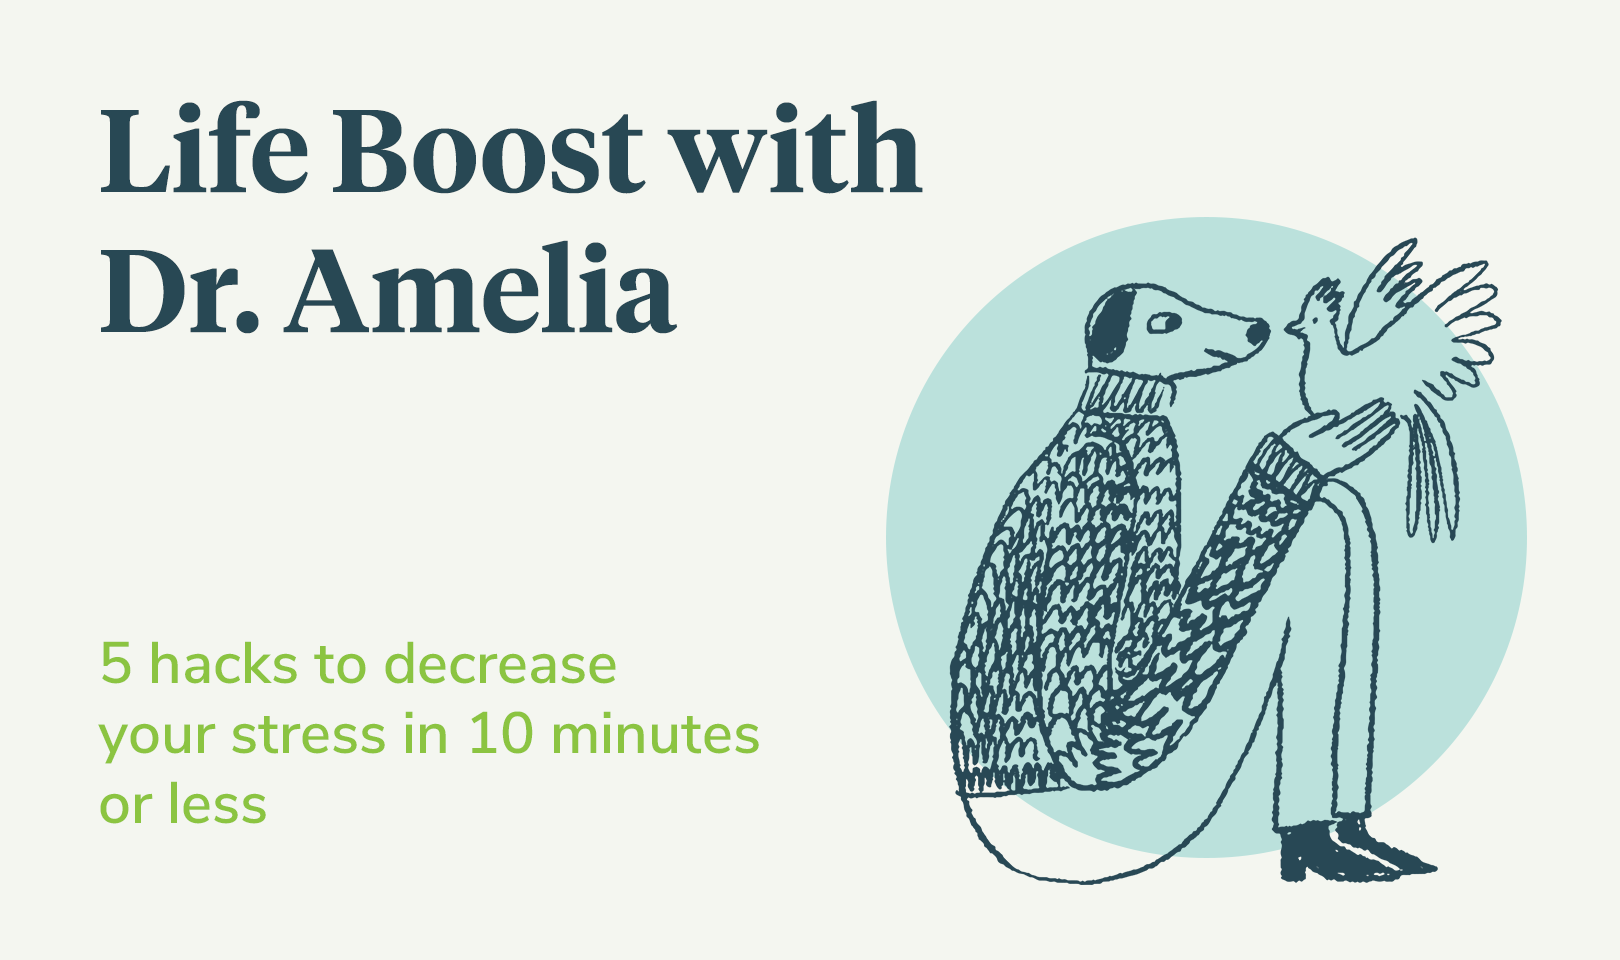 life boost with Dr. Amelia